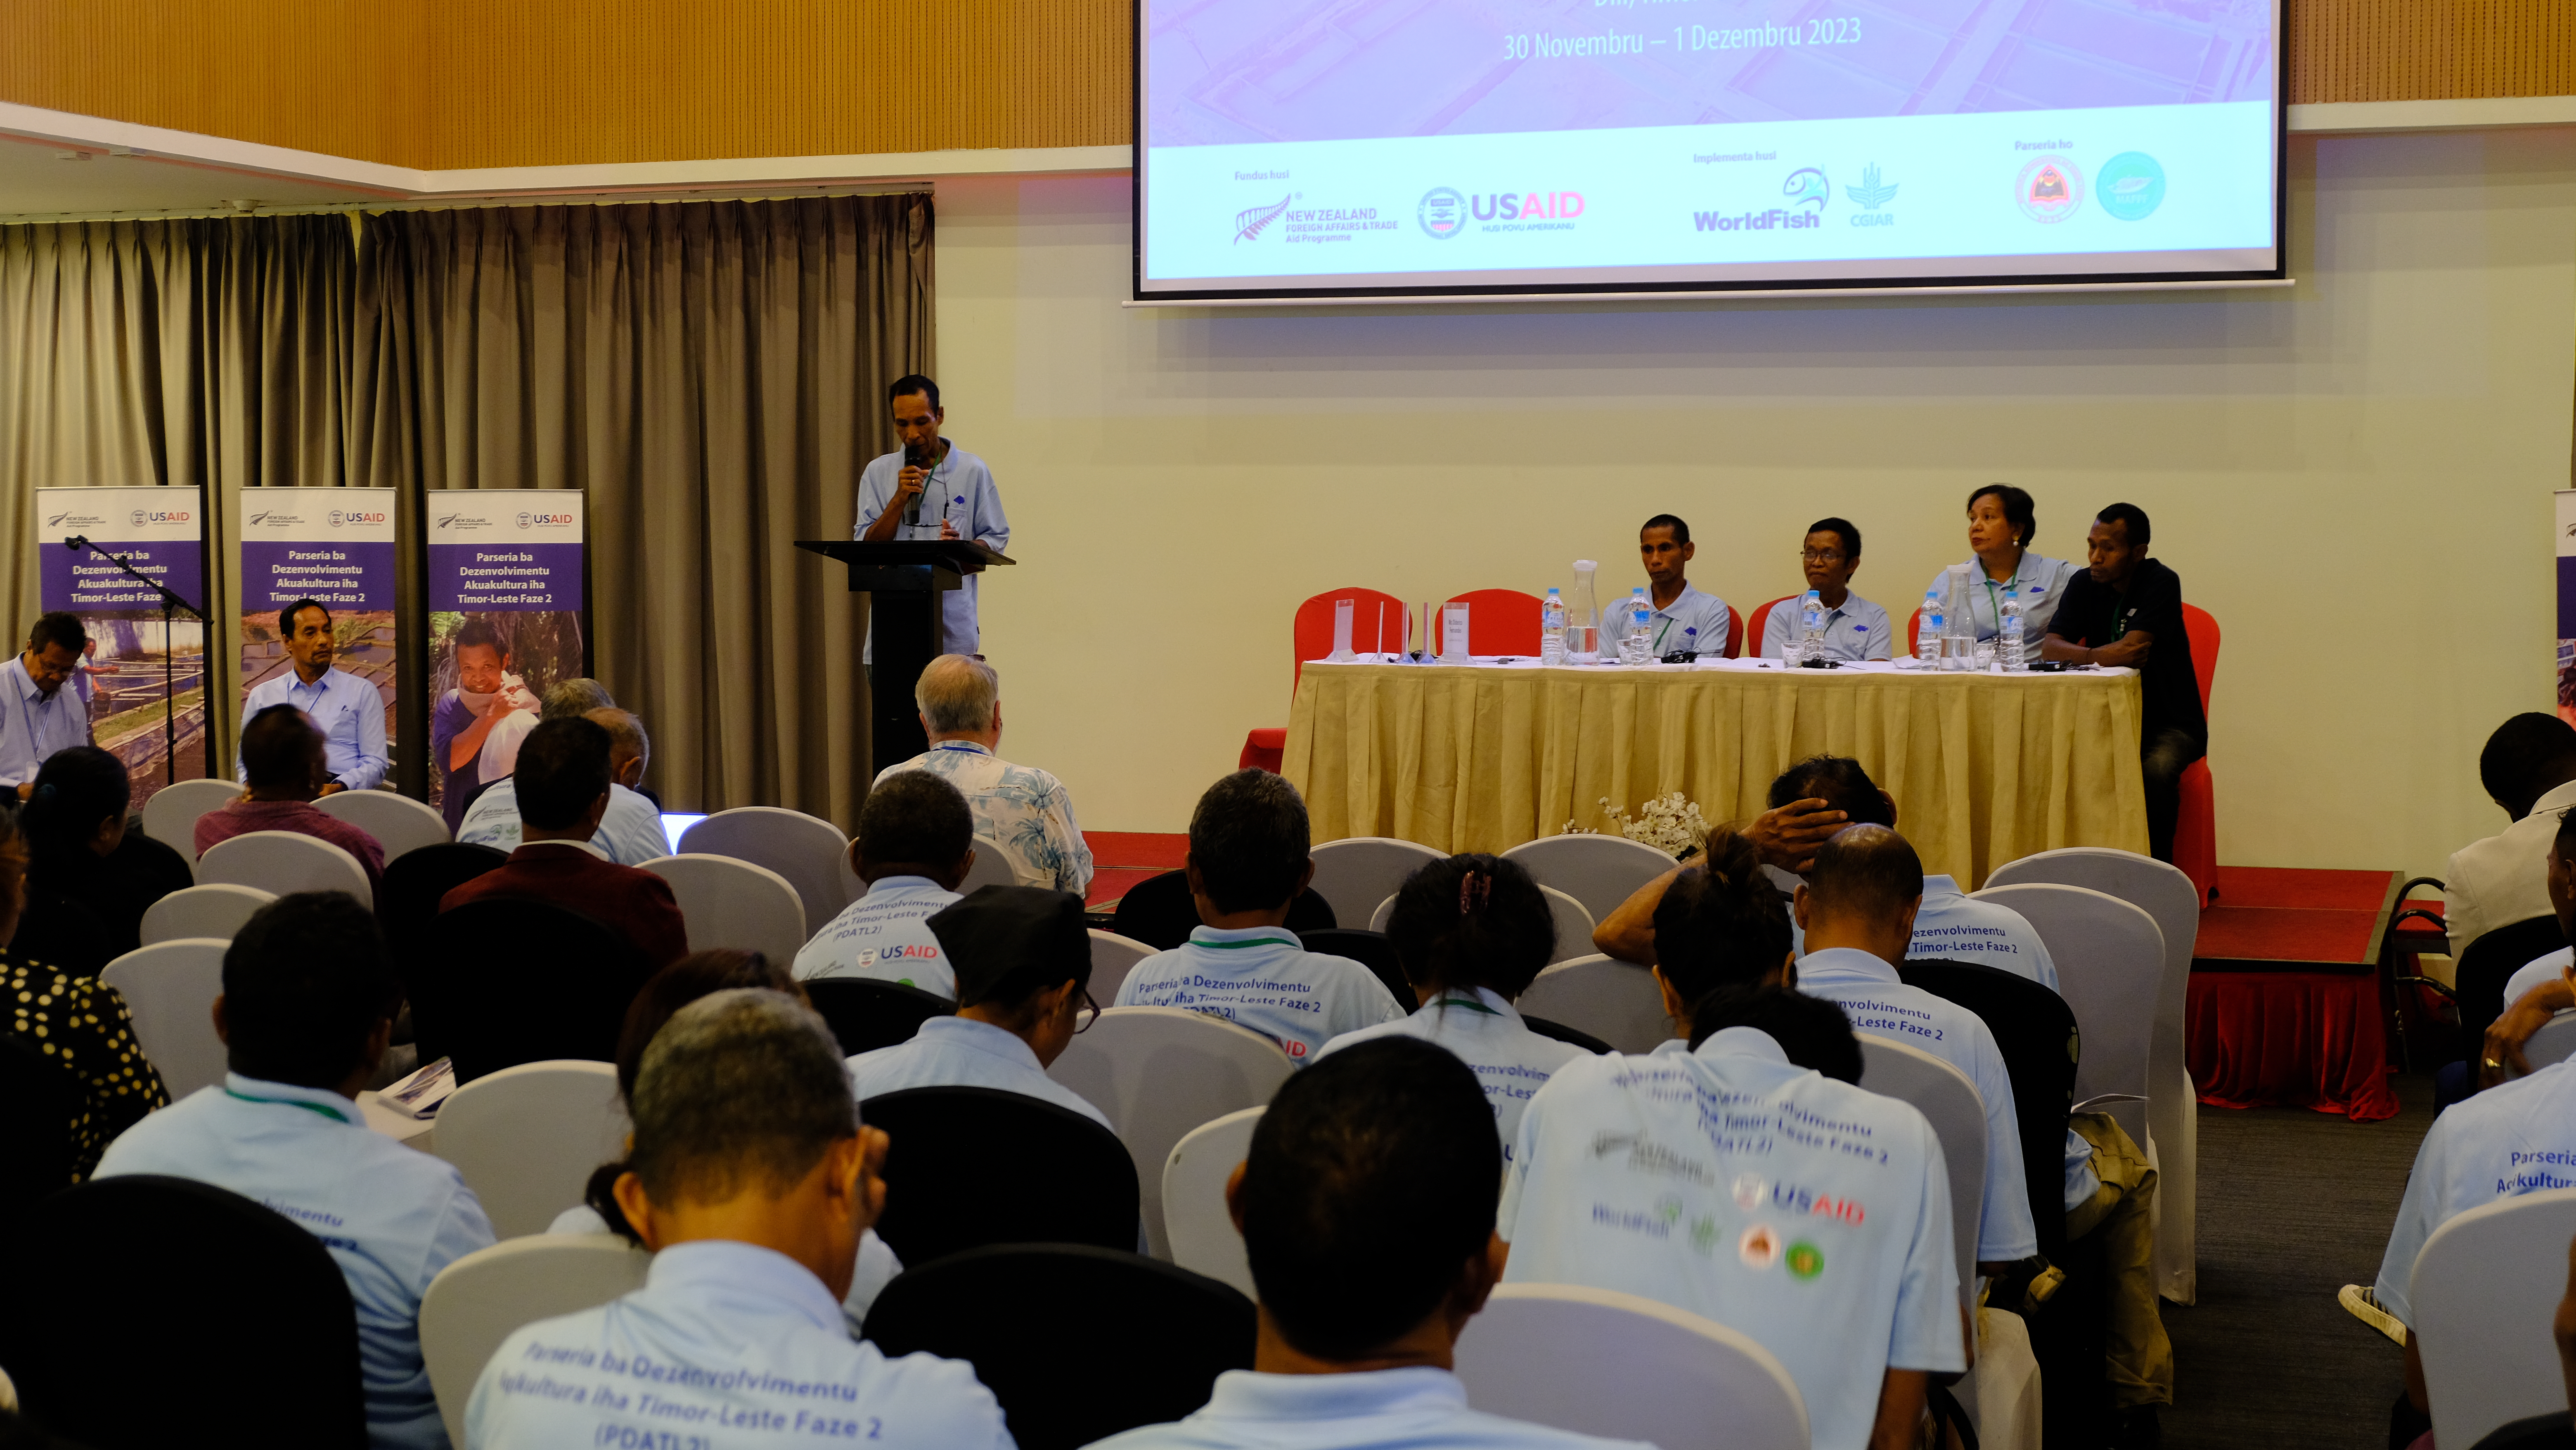 Private sector partner speaking at the 3rd National Aquaculture Forum in Dili, Timor-Leste.